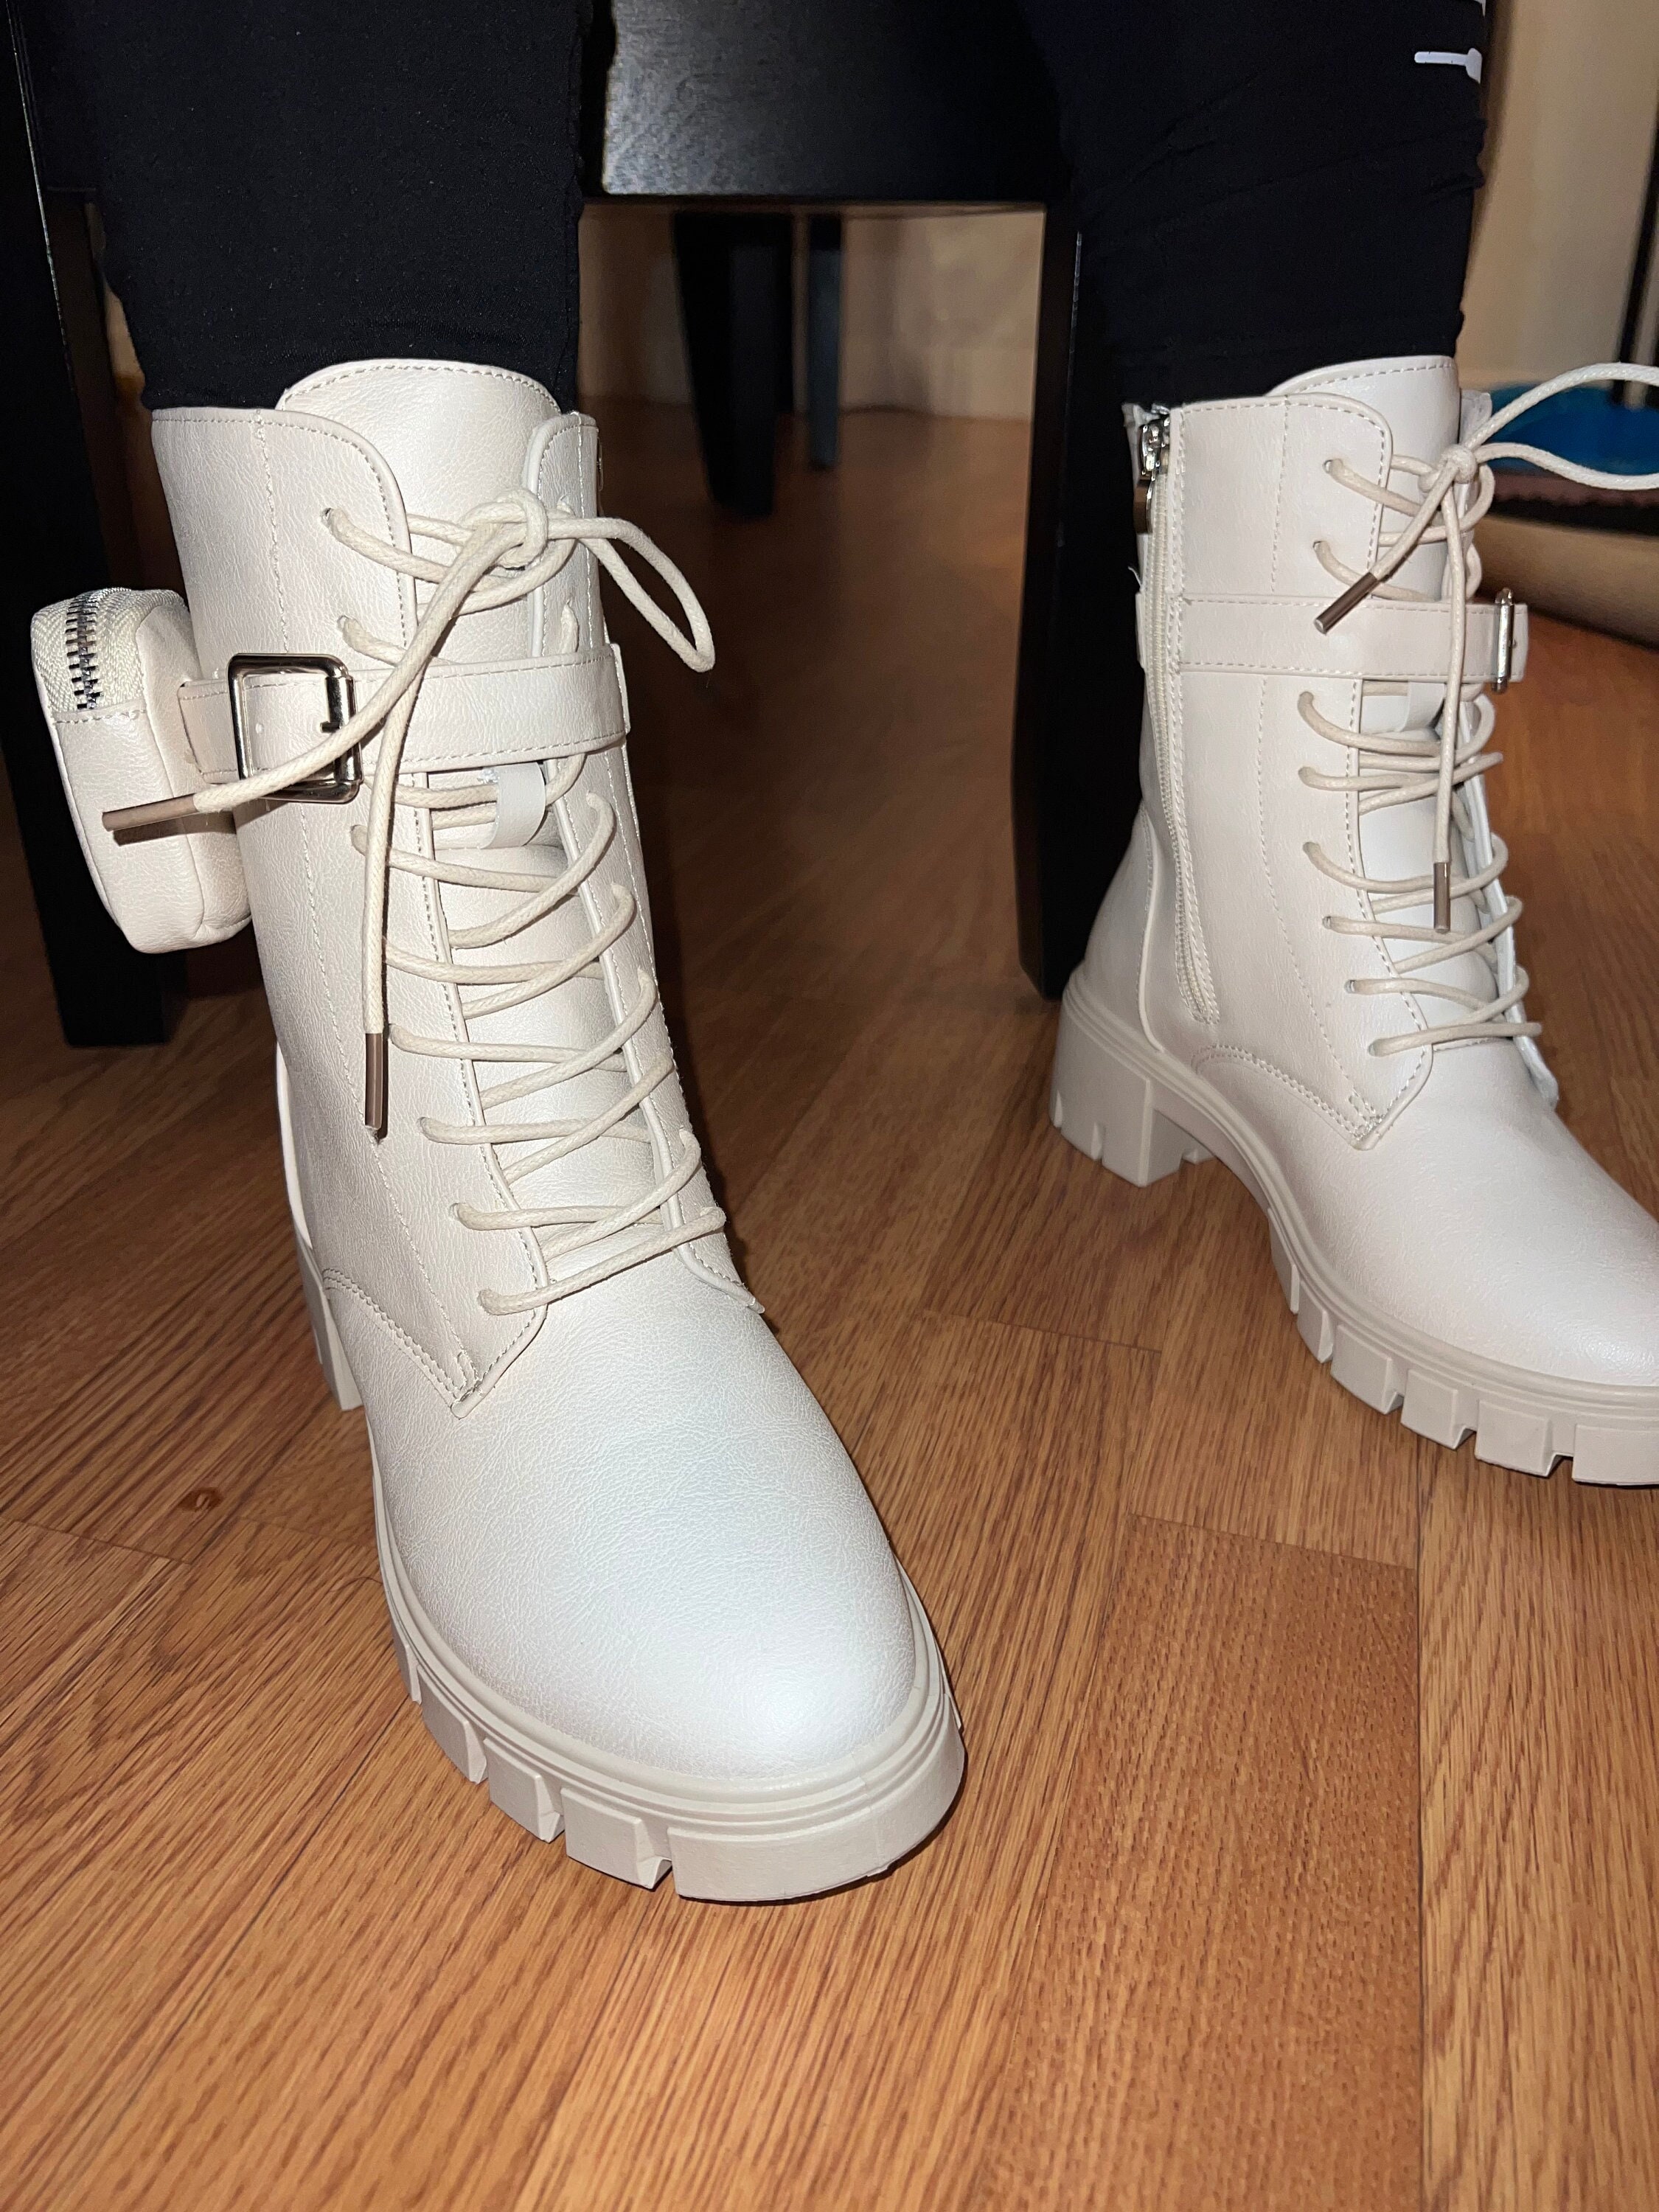 Chanel Boots 8 